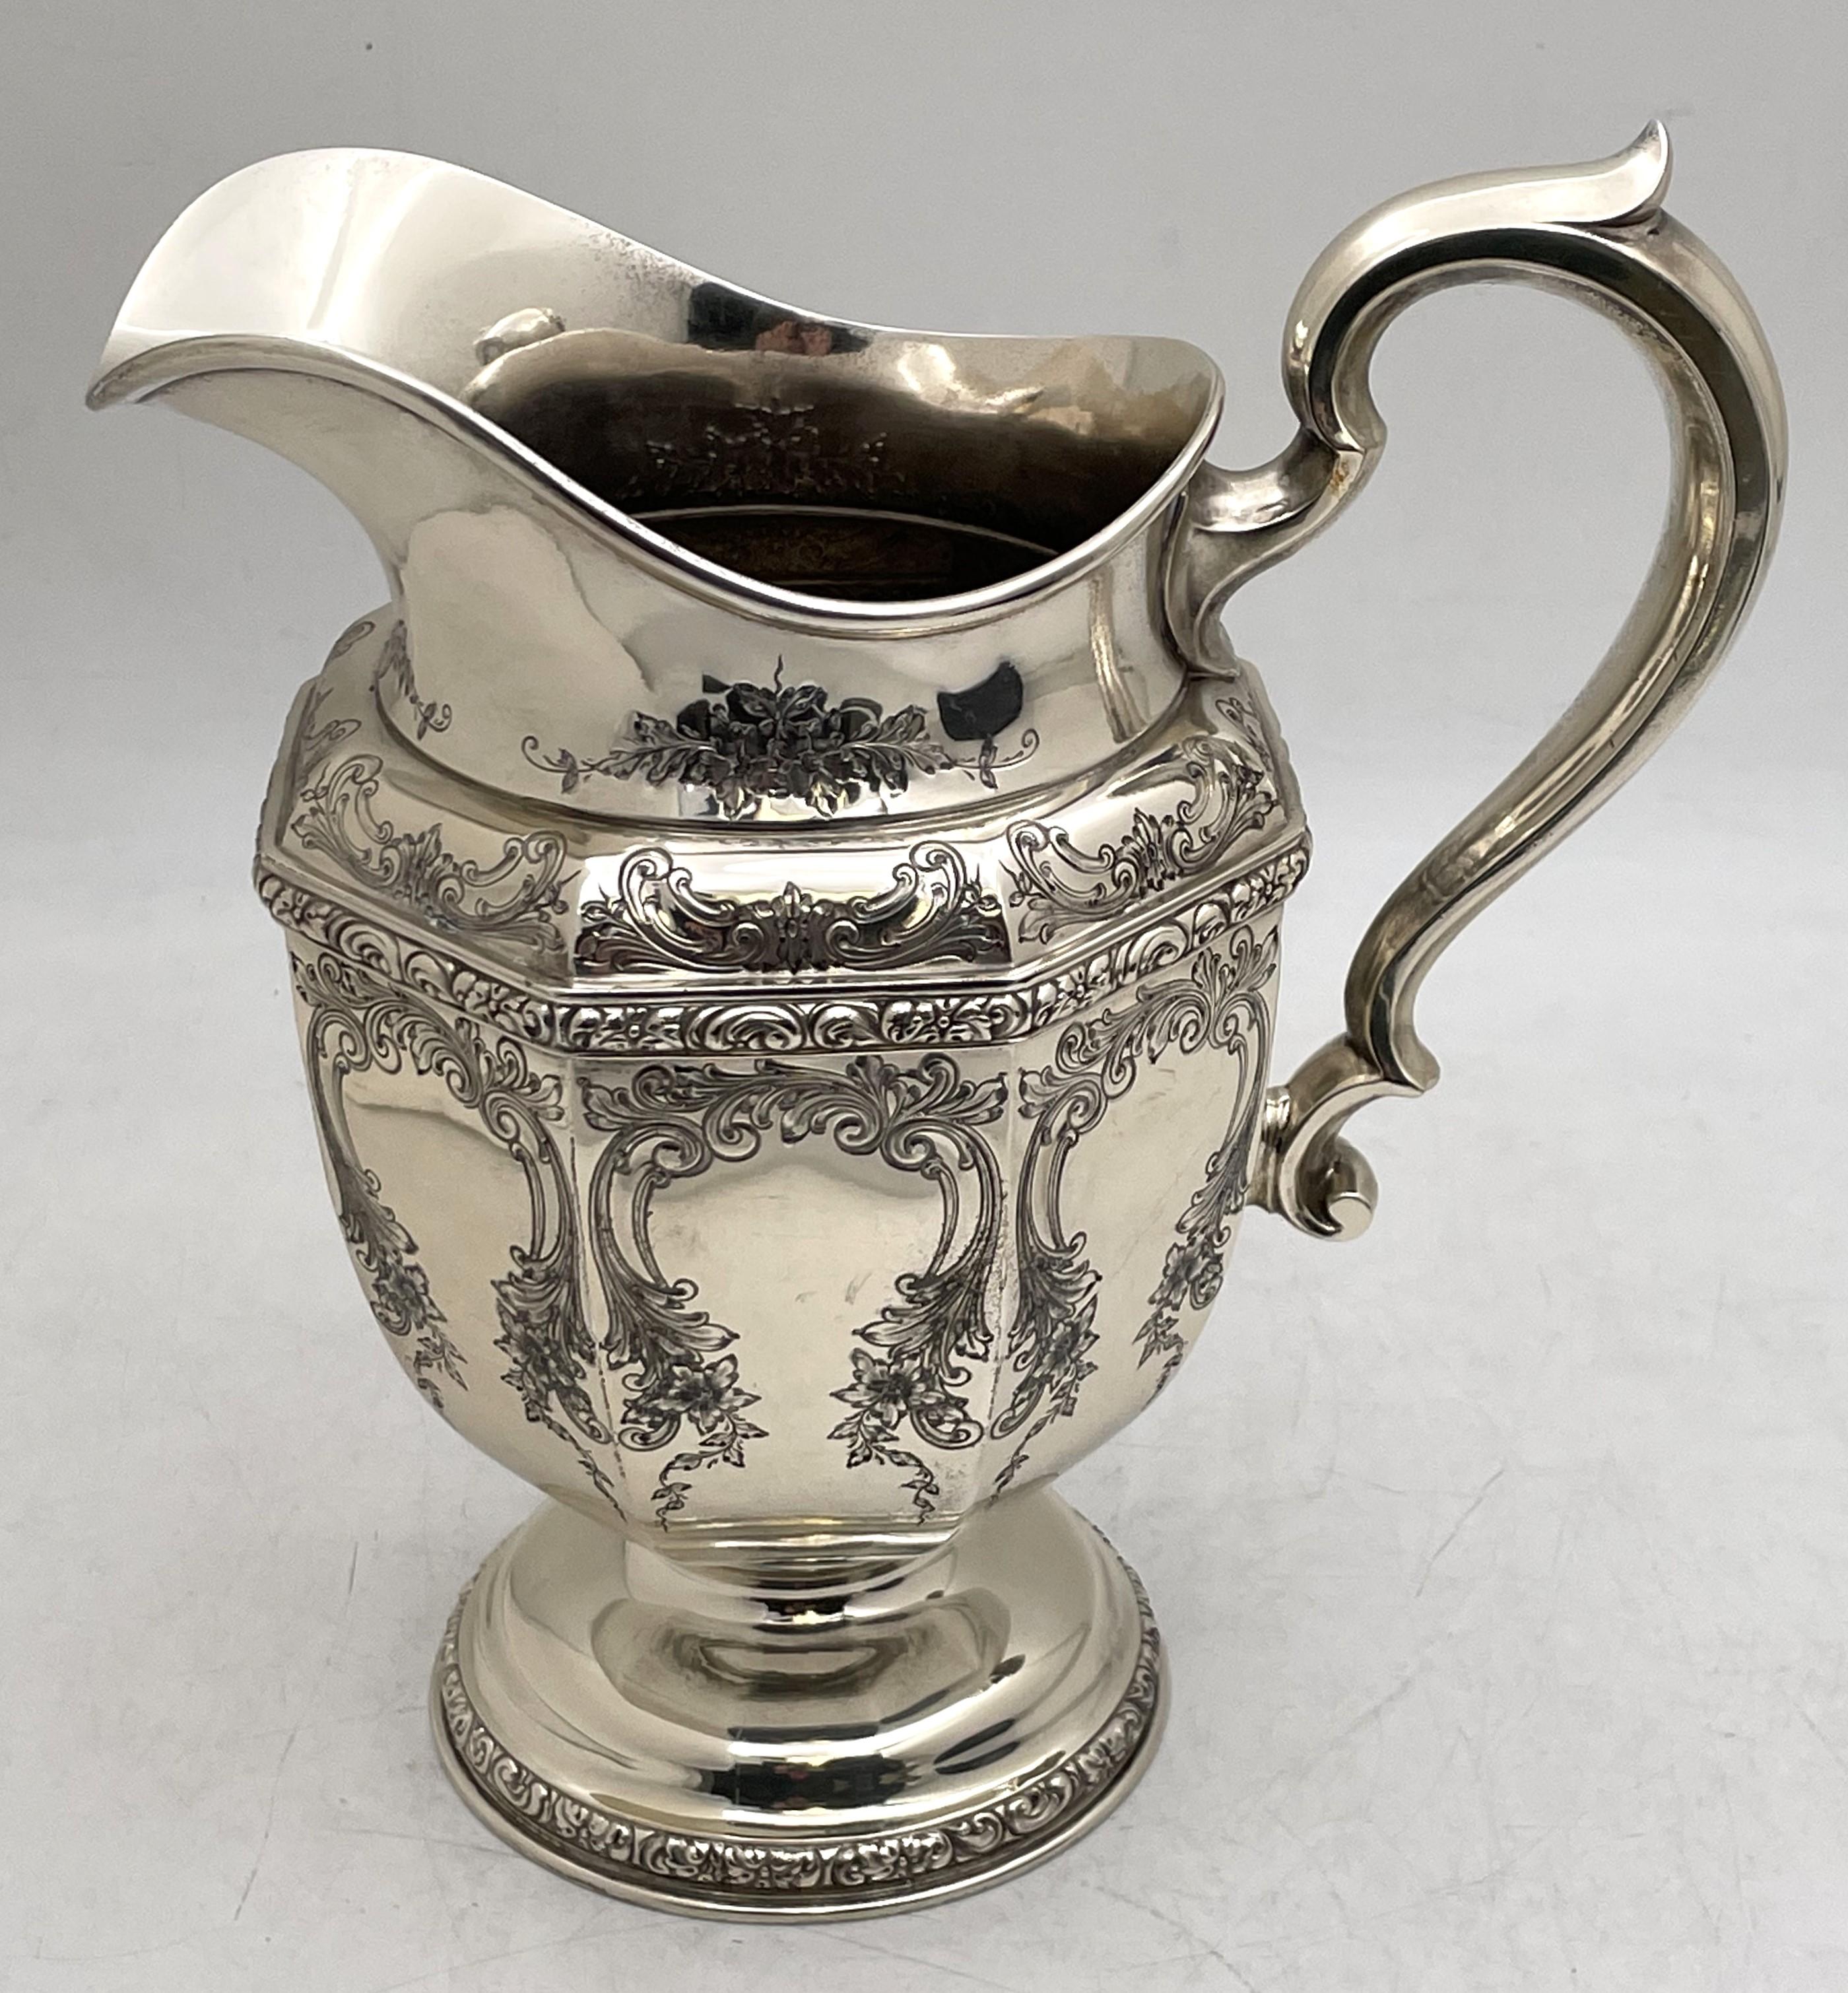 Durgin sterling silver pitcher or jug from the early 20th century, in Art Nouveau style, beautifully adorned with floral and curvilinear motifs. It measures 10 1/2'' in height by 9 1/2'' from handle to spout, weighs 33.4 troy ounces, and bears